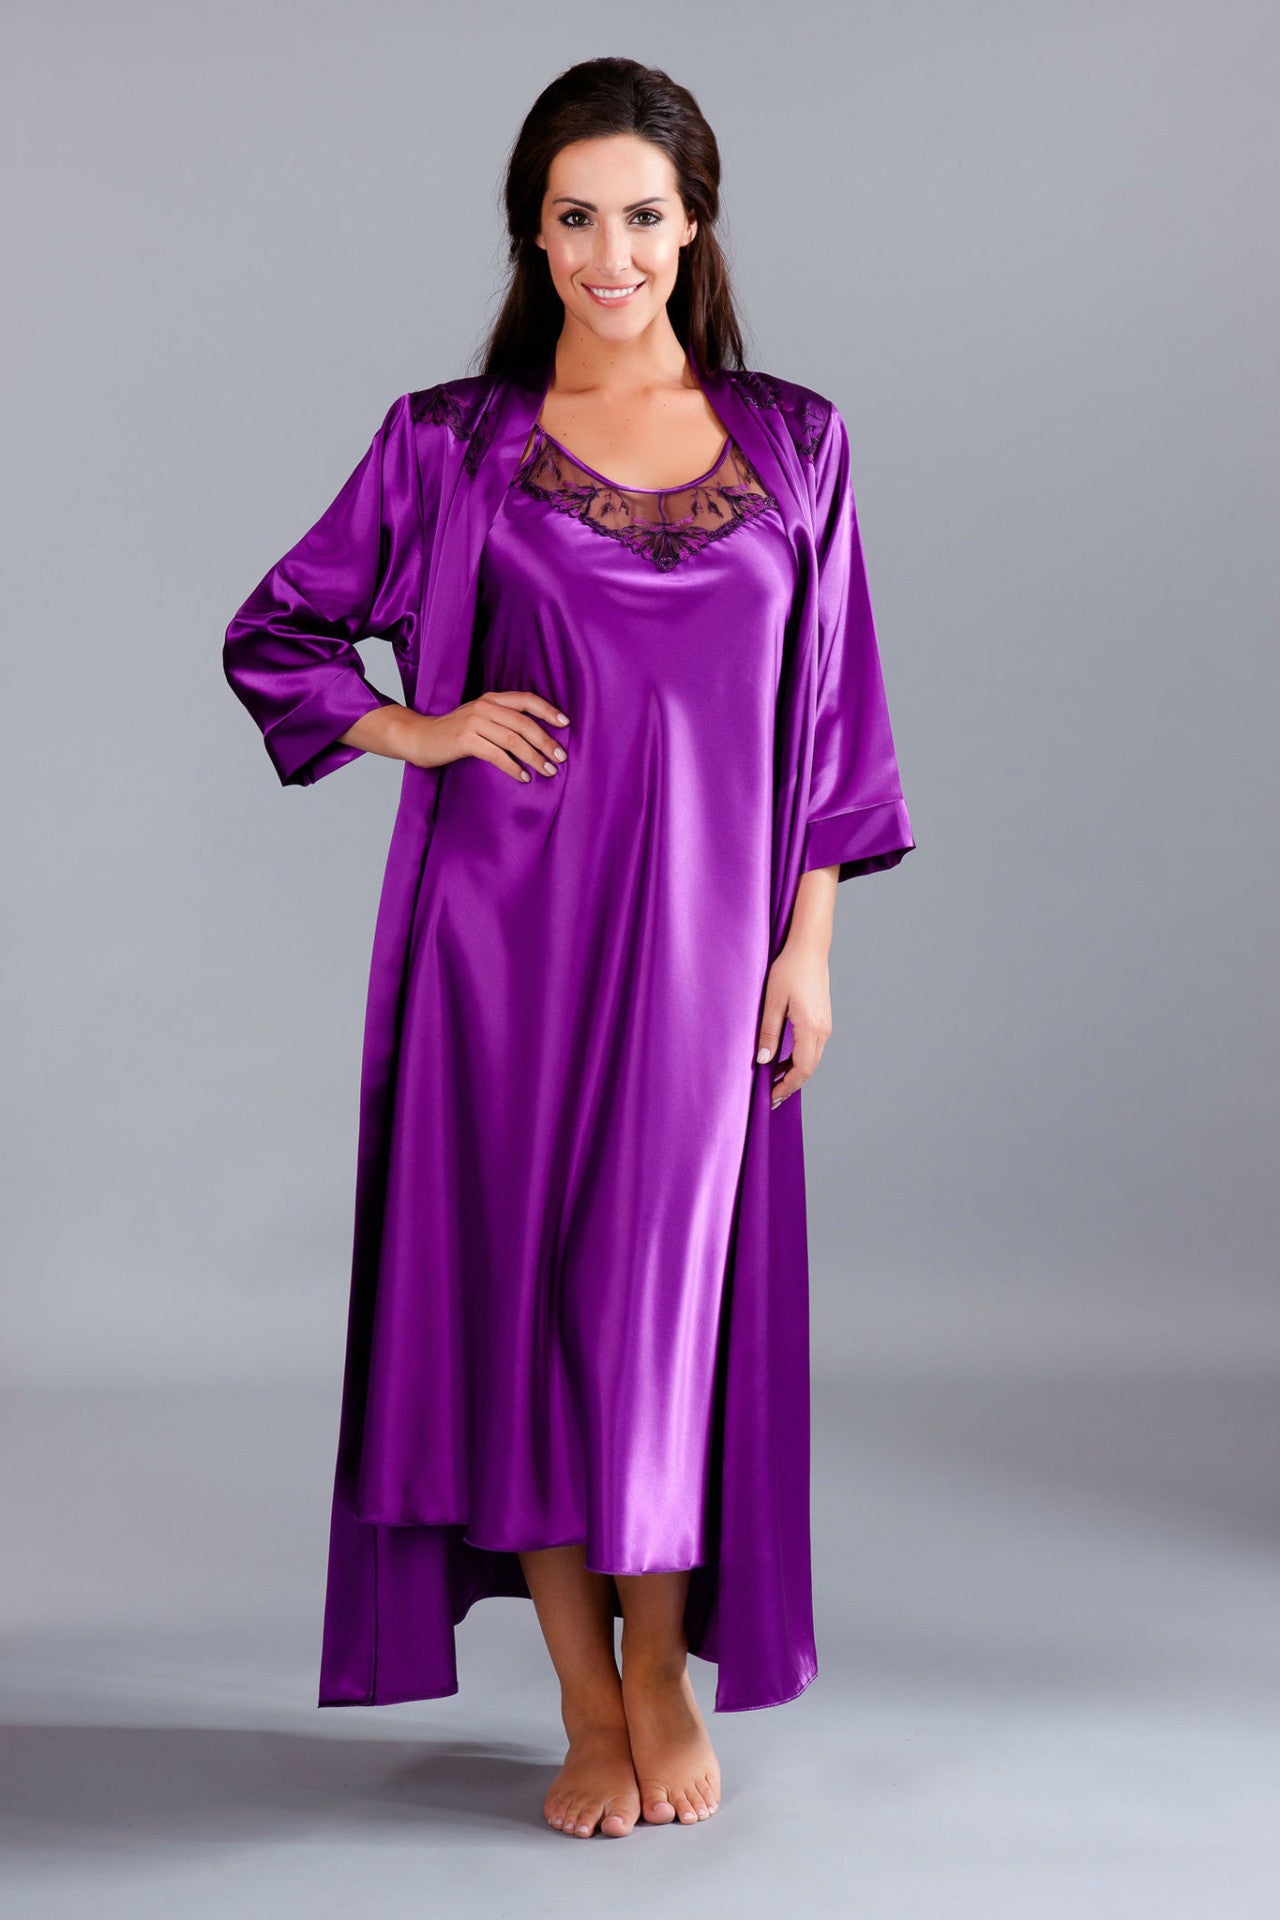 9 Comfortable Daily Wear Satin Nightdress Types for Ladies